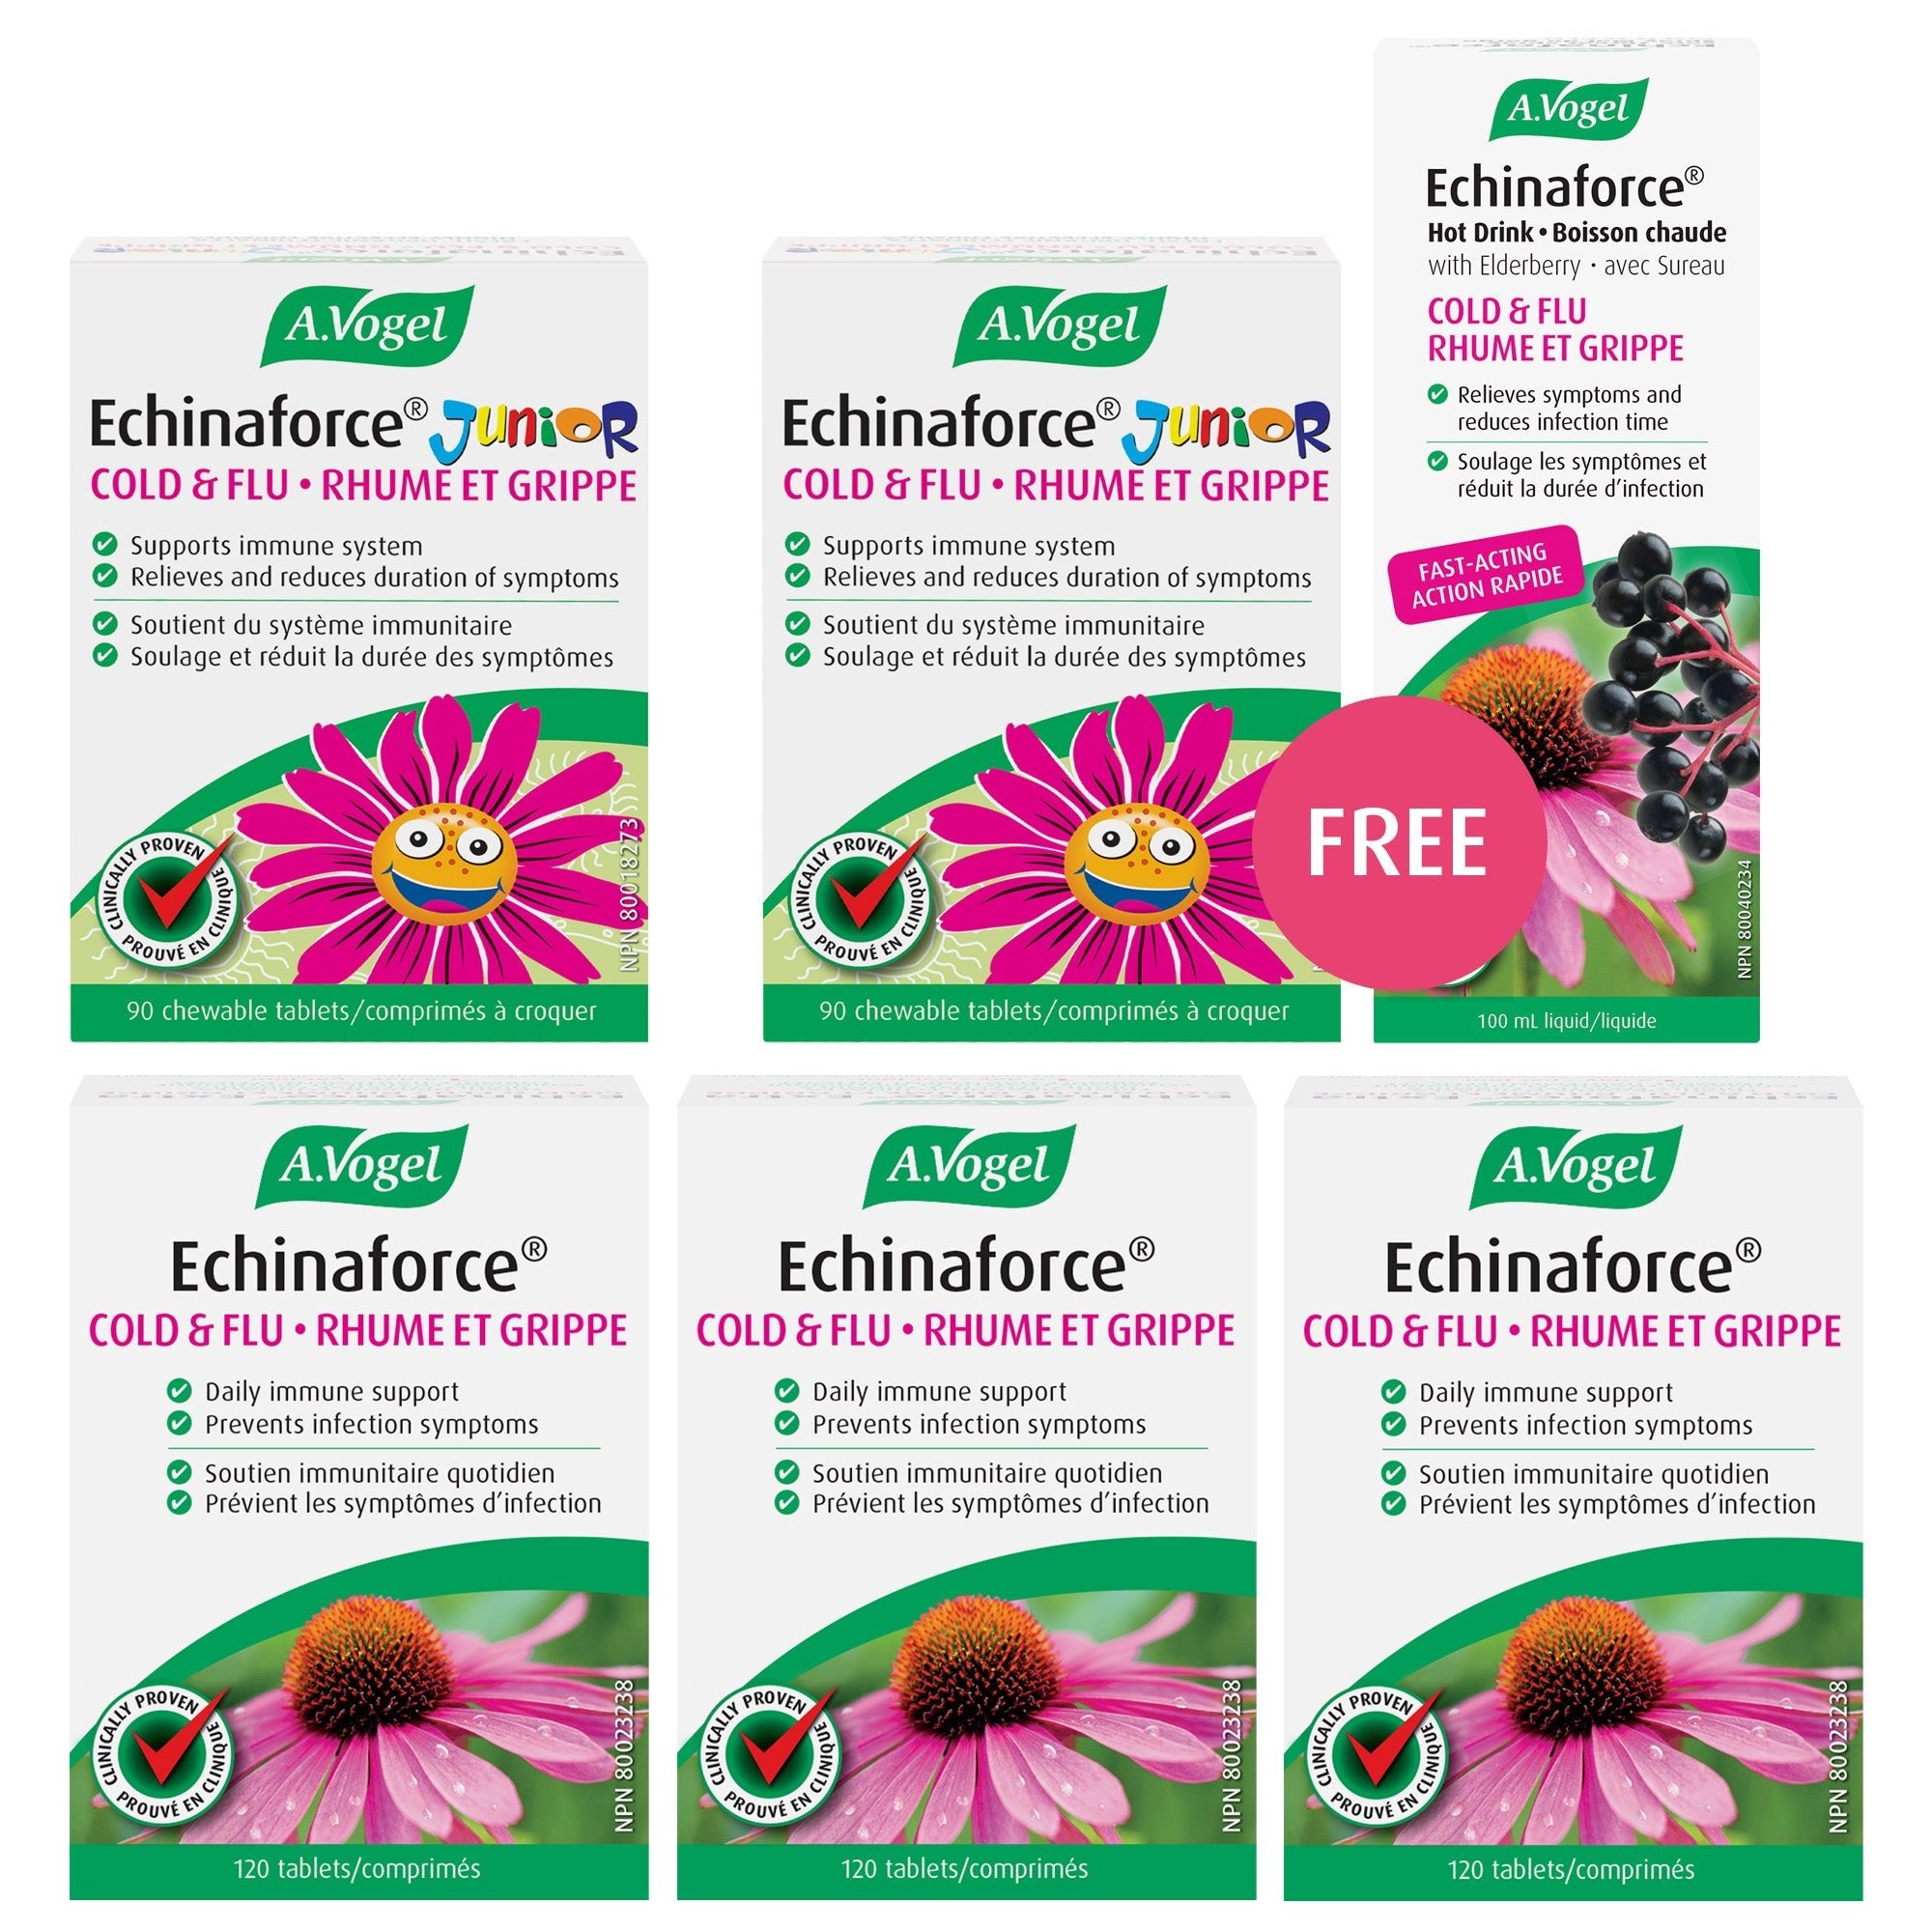 A.Vogel Echinaforce Complete Family Wellness Pack - A.Vogel Canada